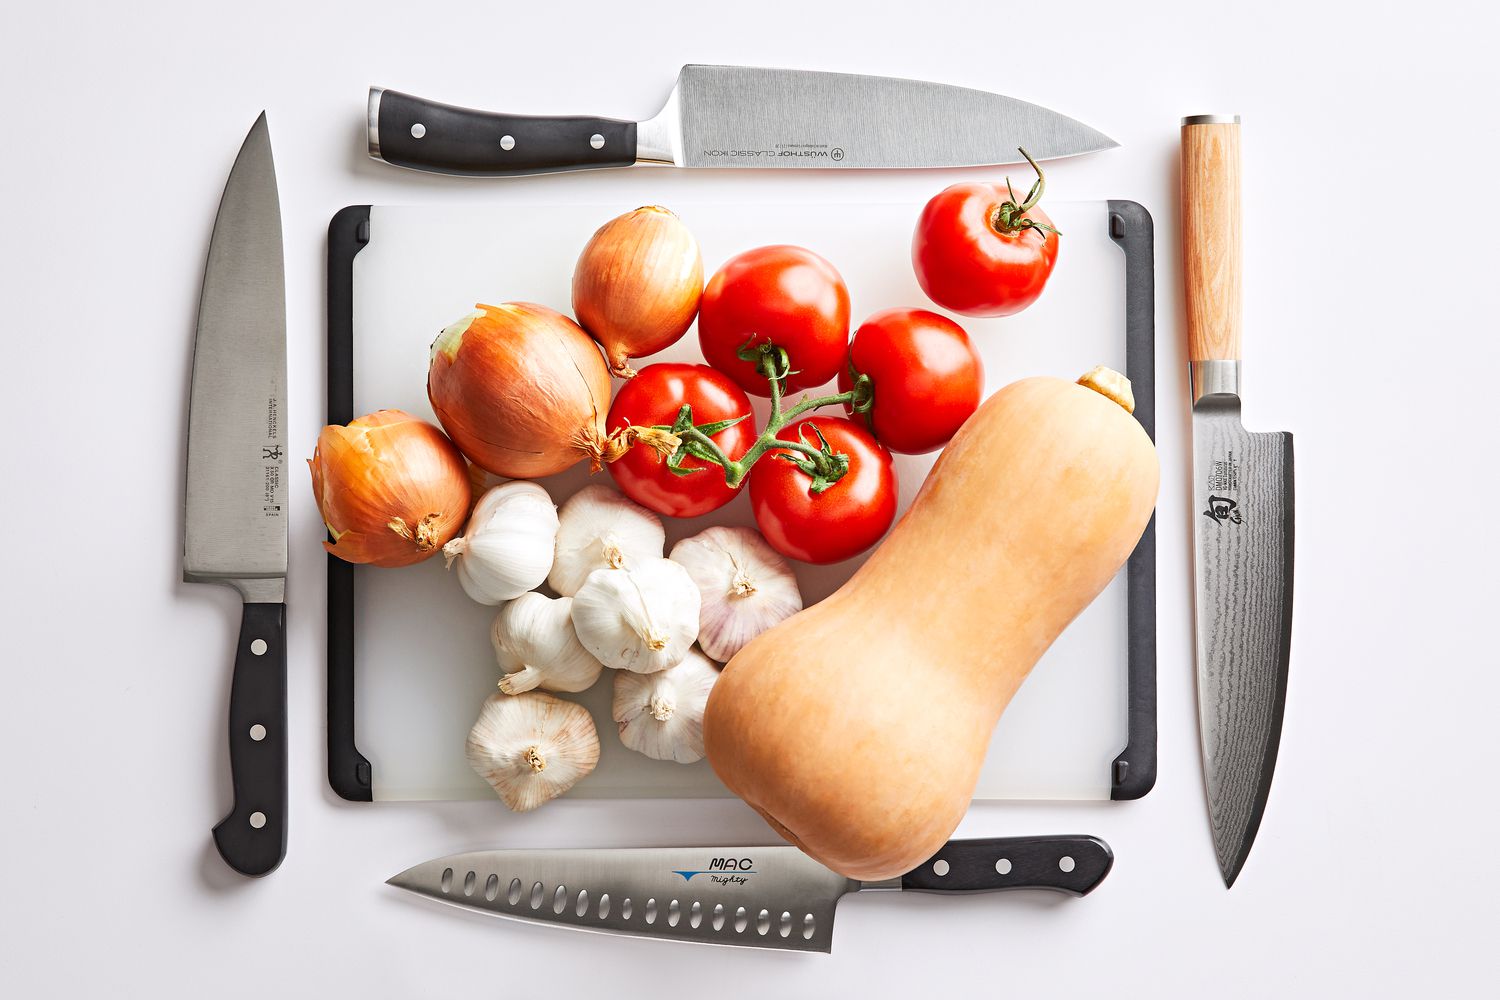 Several chefs knives displayed around a cutting board with vegetables and butternut squash